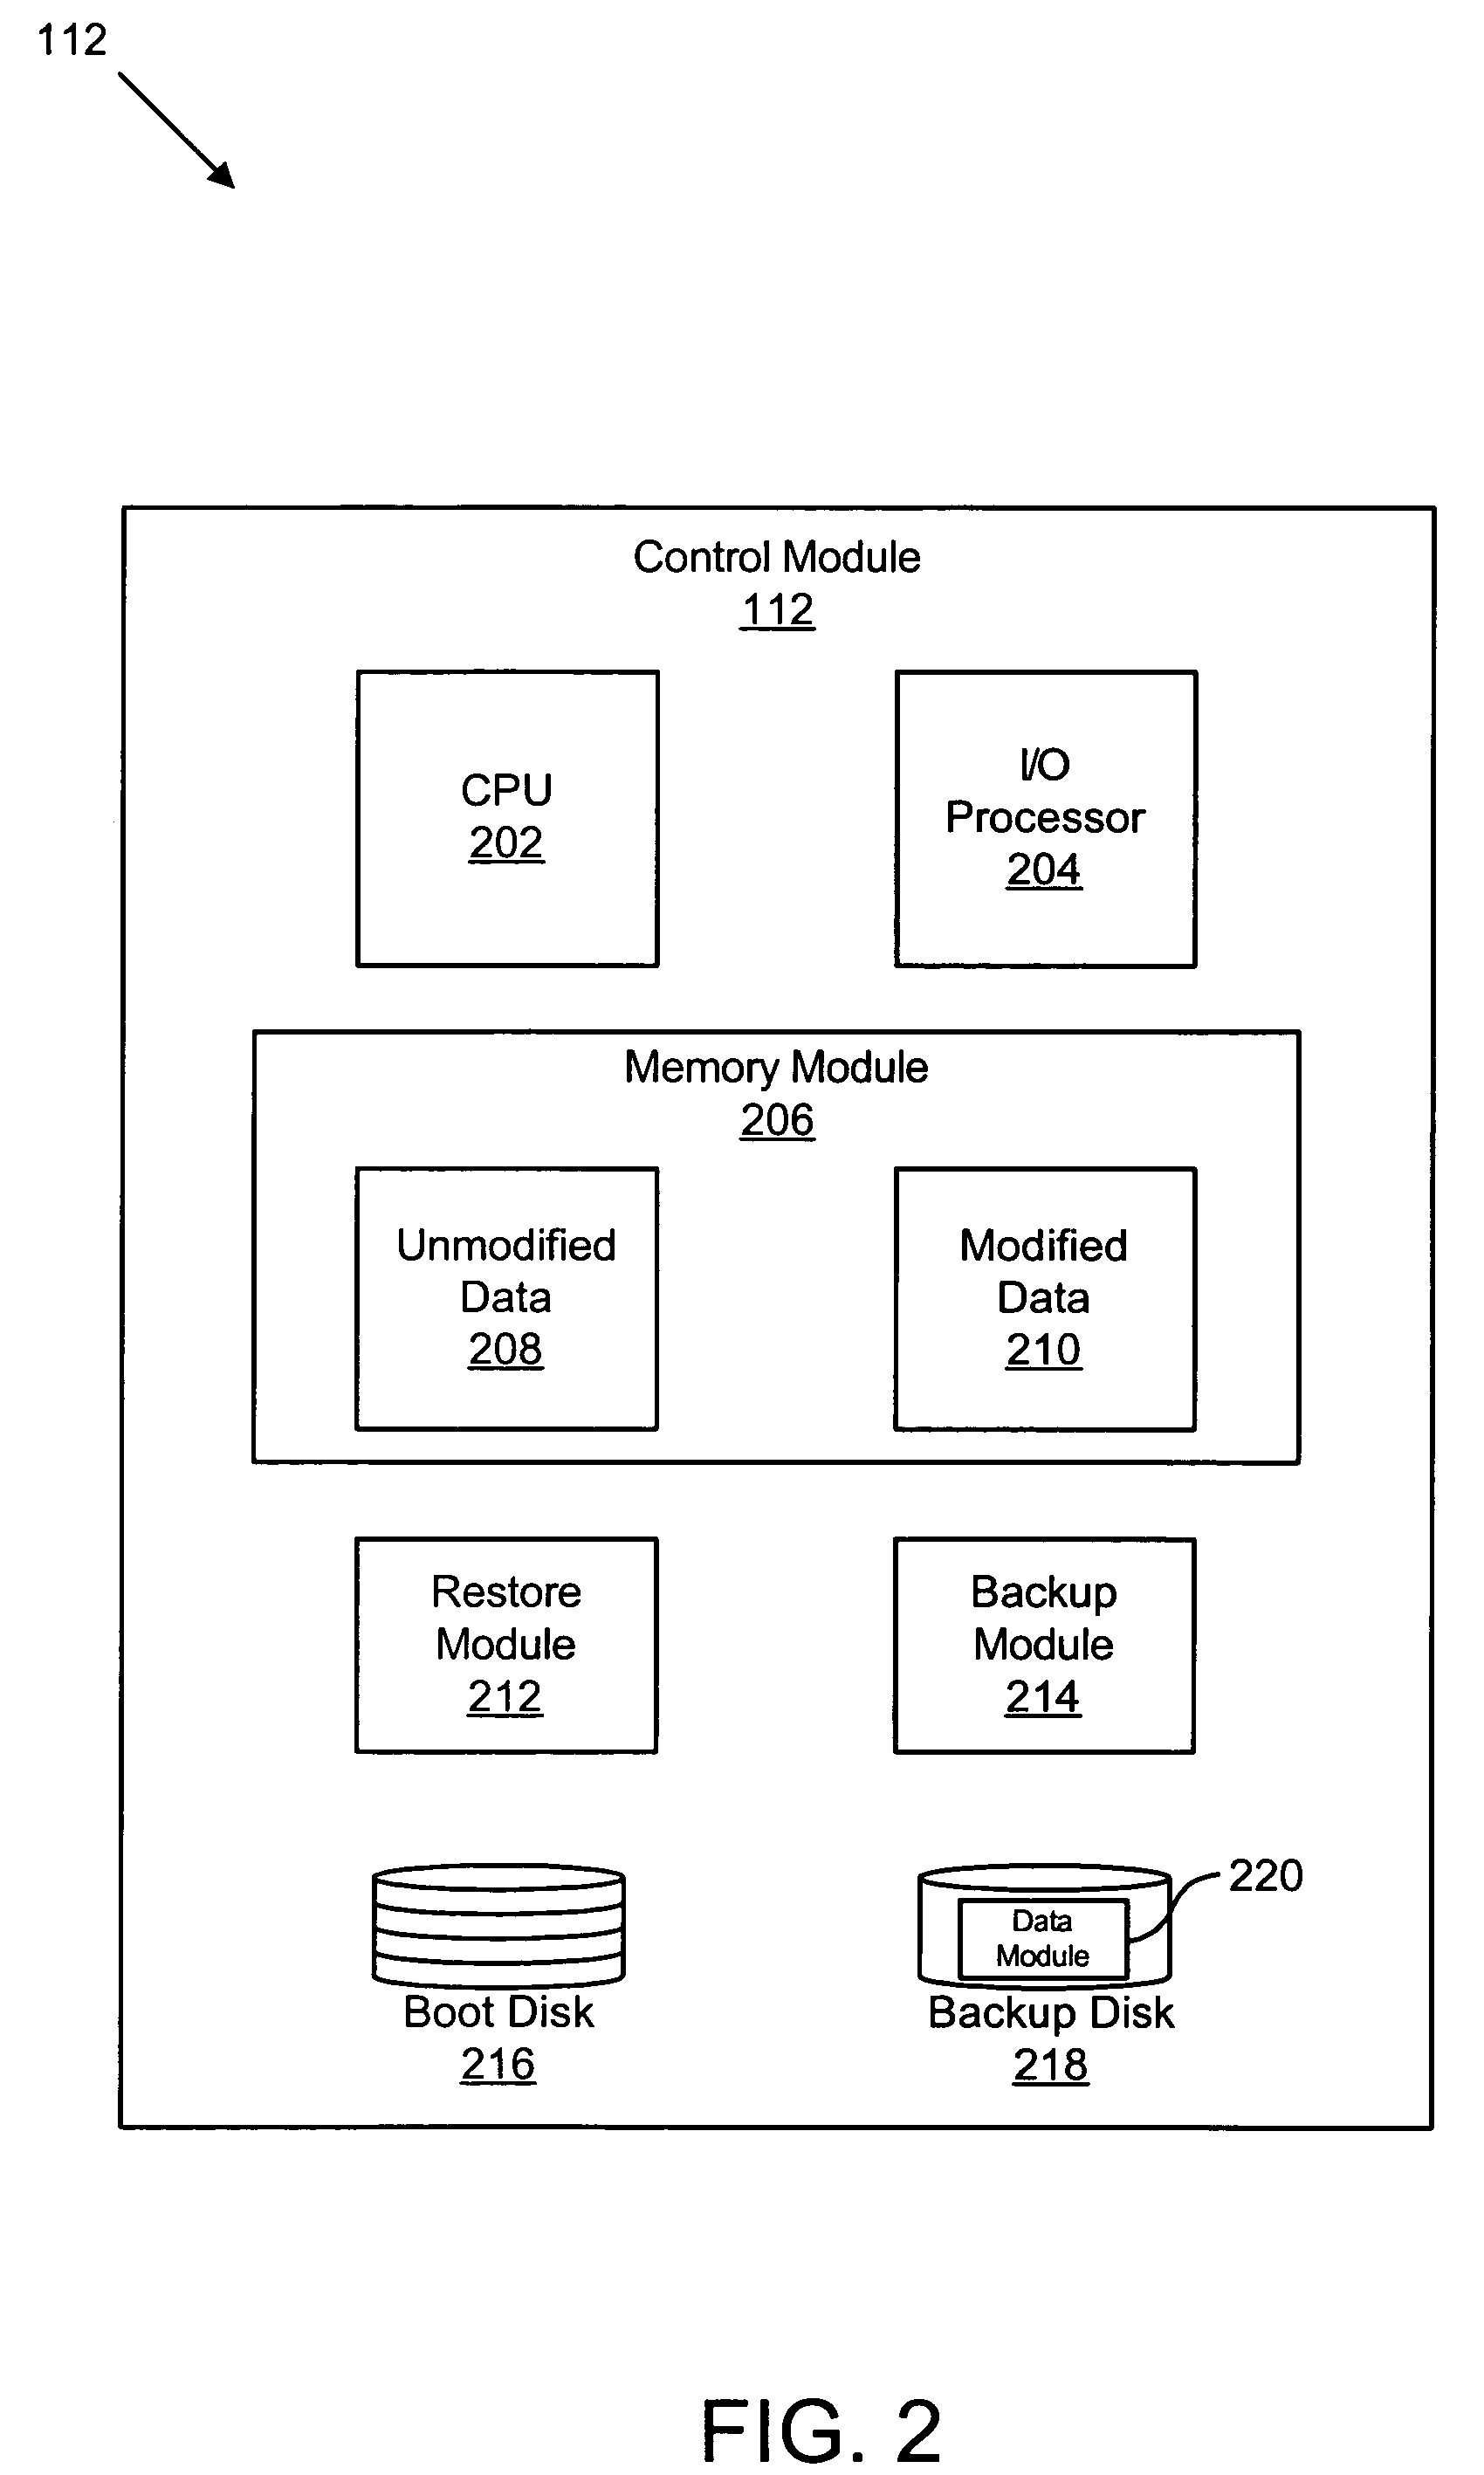 Apparatus, system, and method for emergency backup